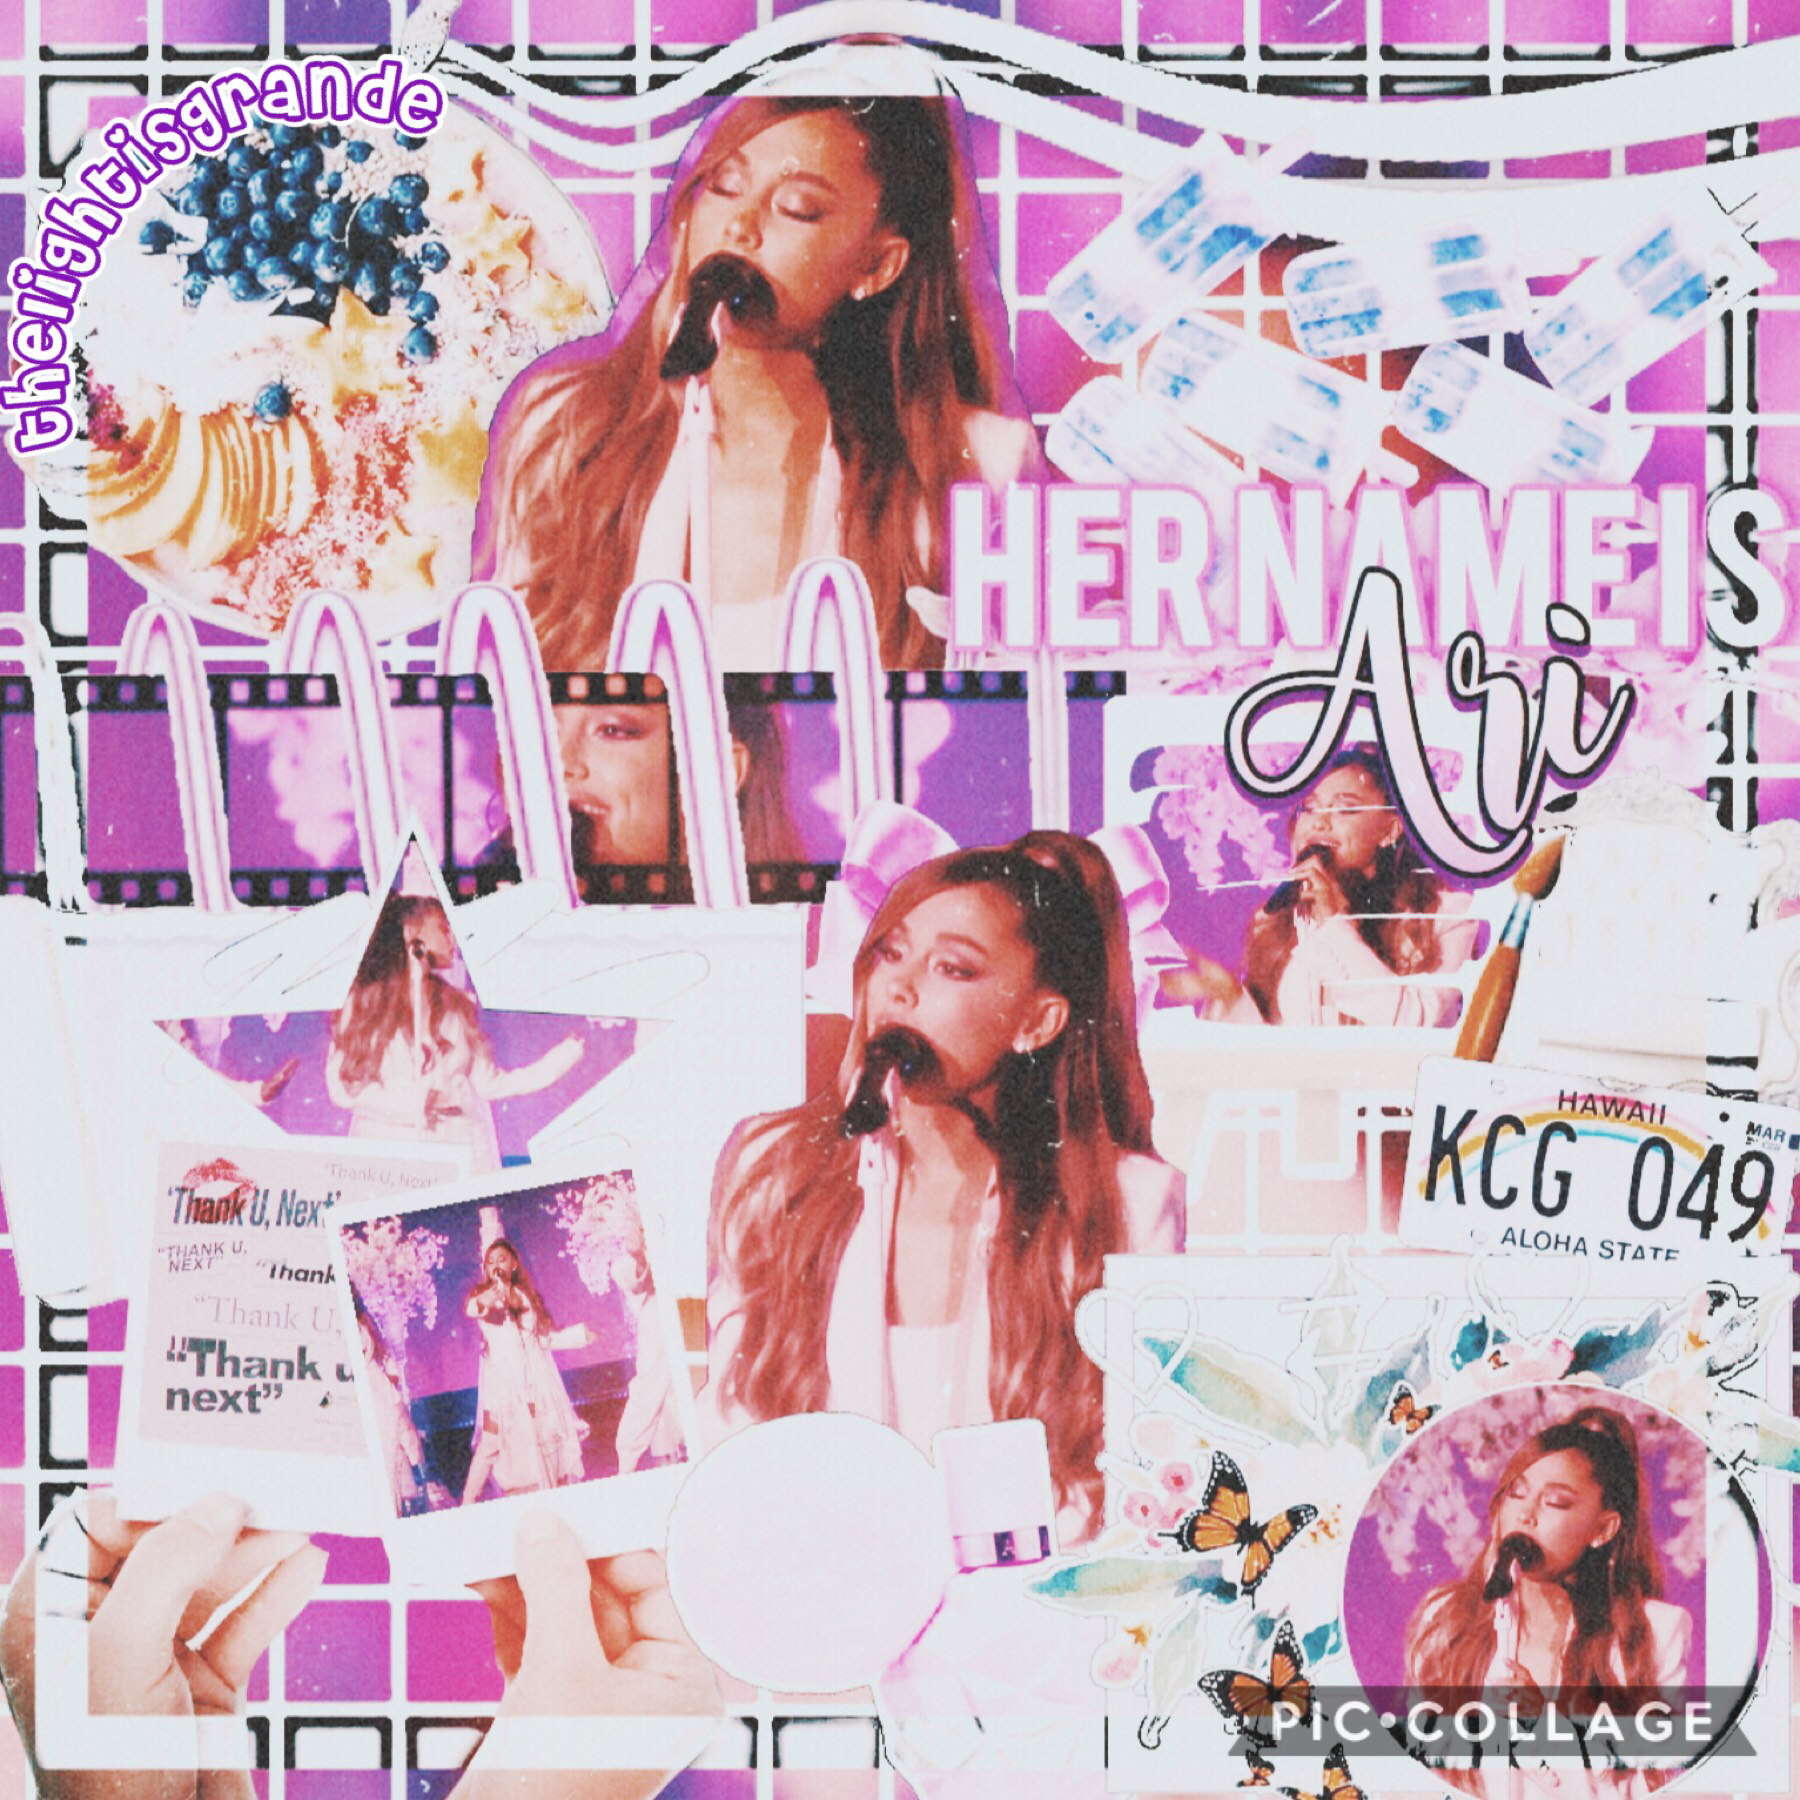 💜tap💜
💫I don’t like this but I need to post😂Shoutout to @ellasediting SHE’S BACK!!💗🌈qotd: what’s ur favorite new emoji? aotd: the party one🥳🥳🥳😂